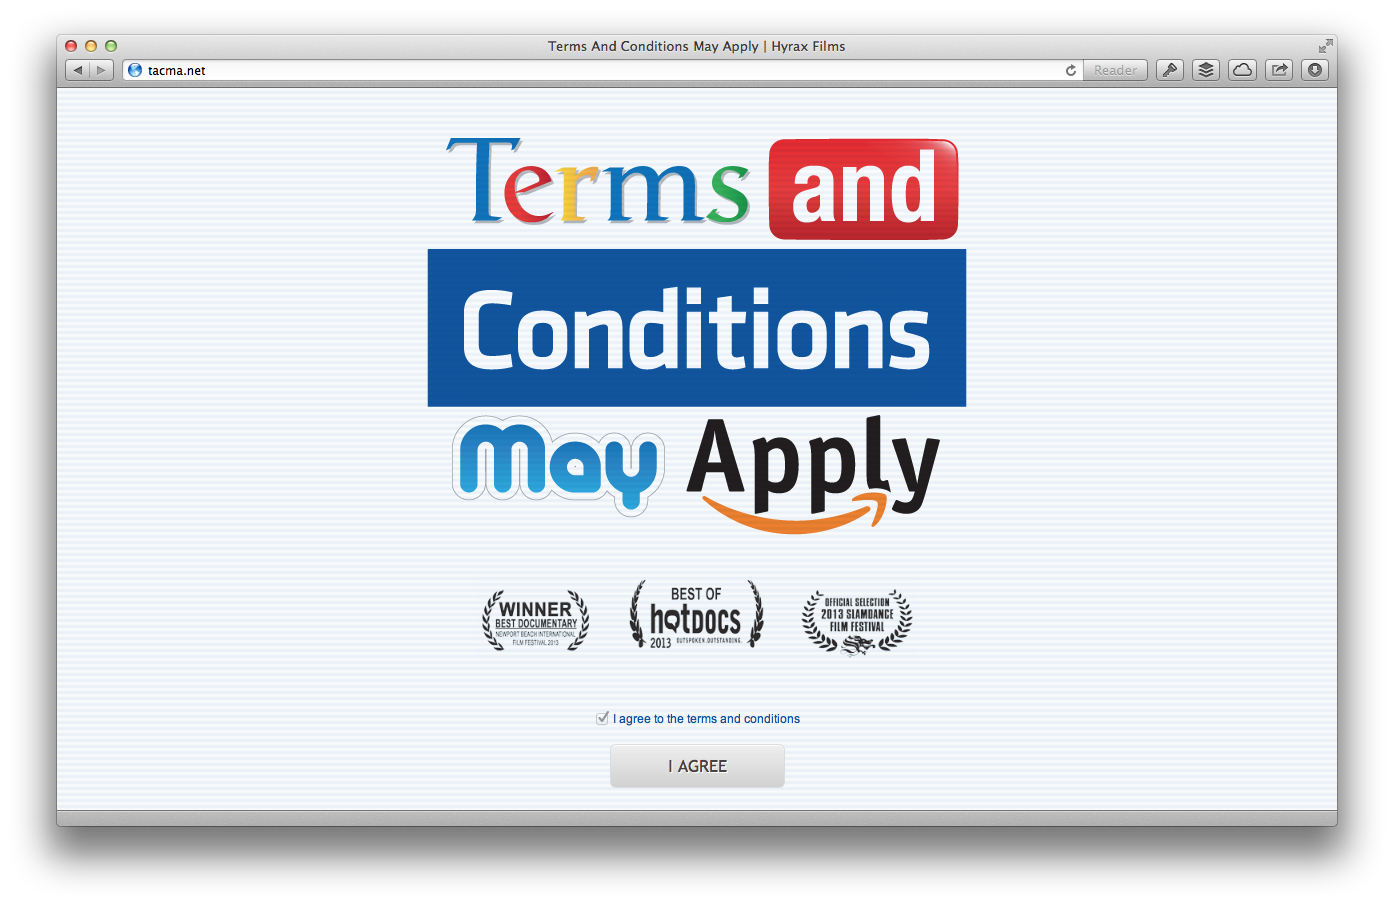 Terms and Conditions May Apply documentary screening on September 7th, 2013 in Brighton.